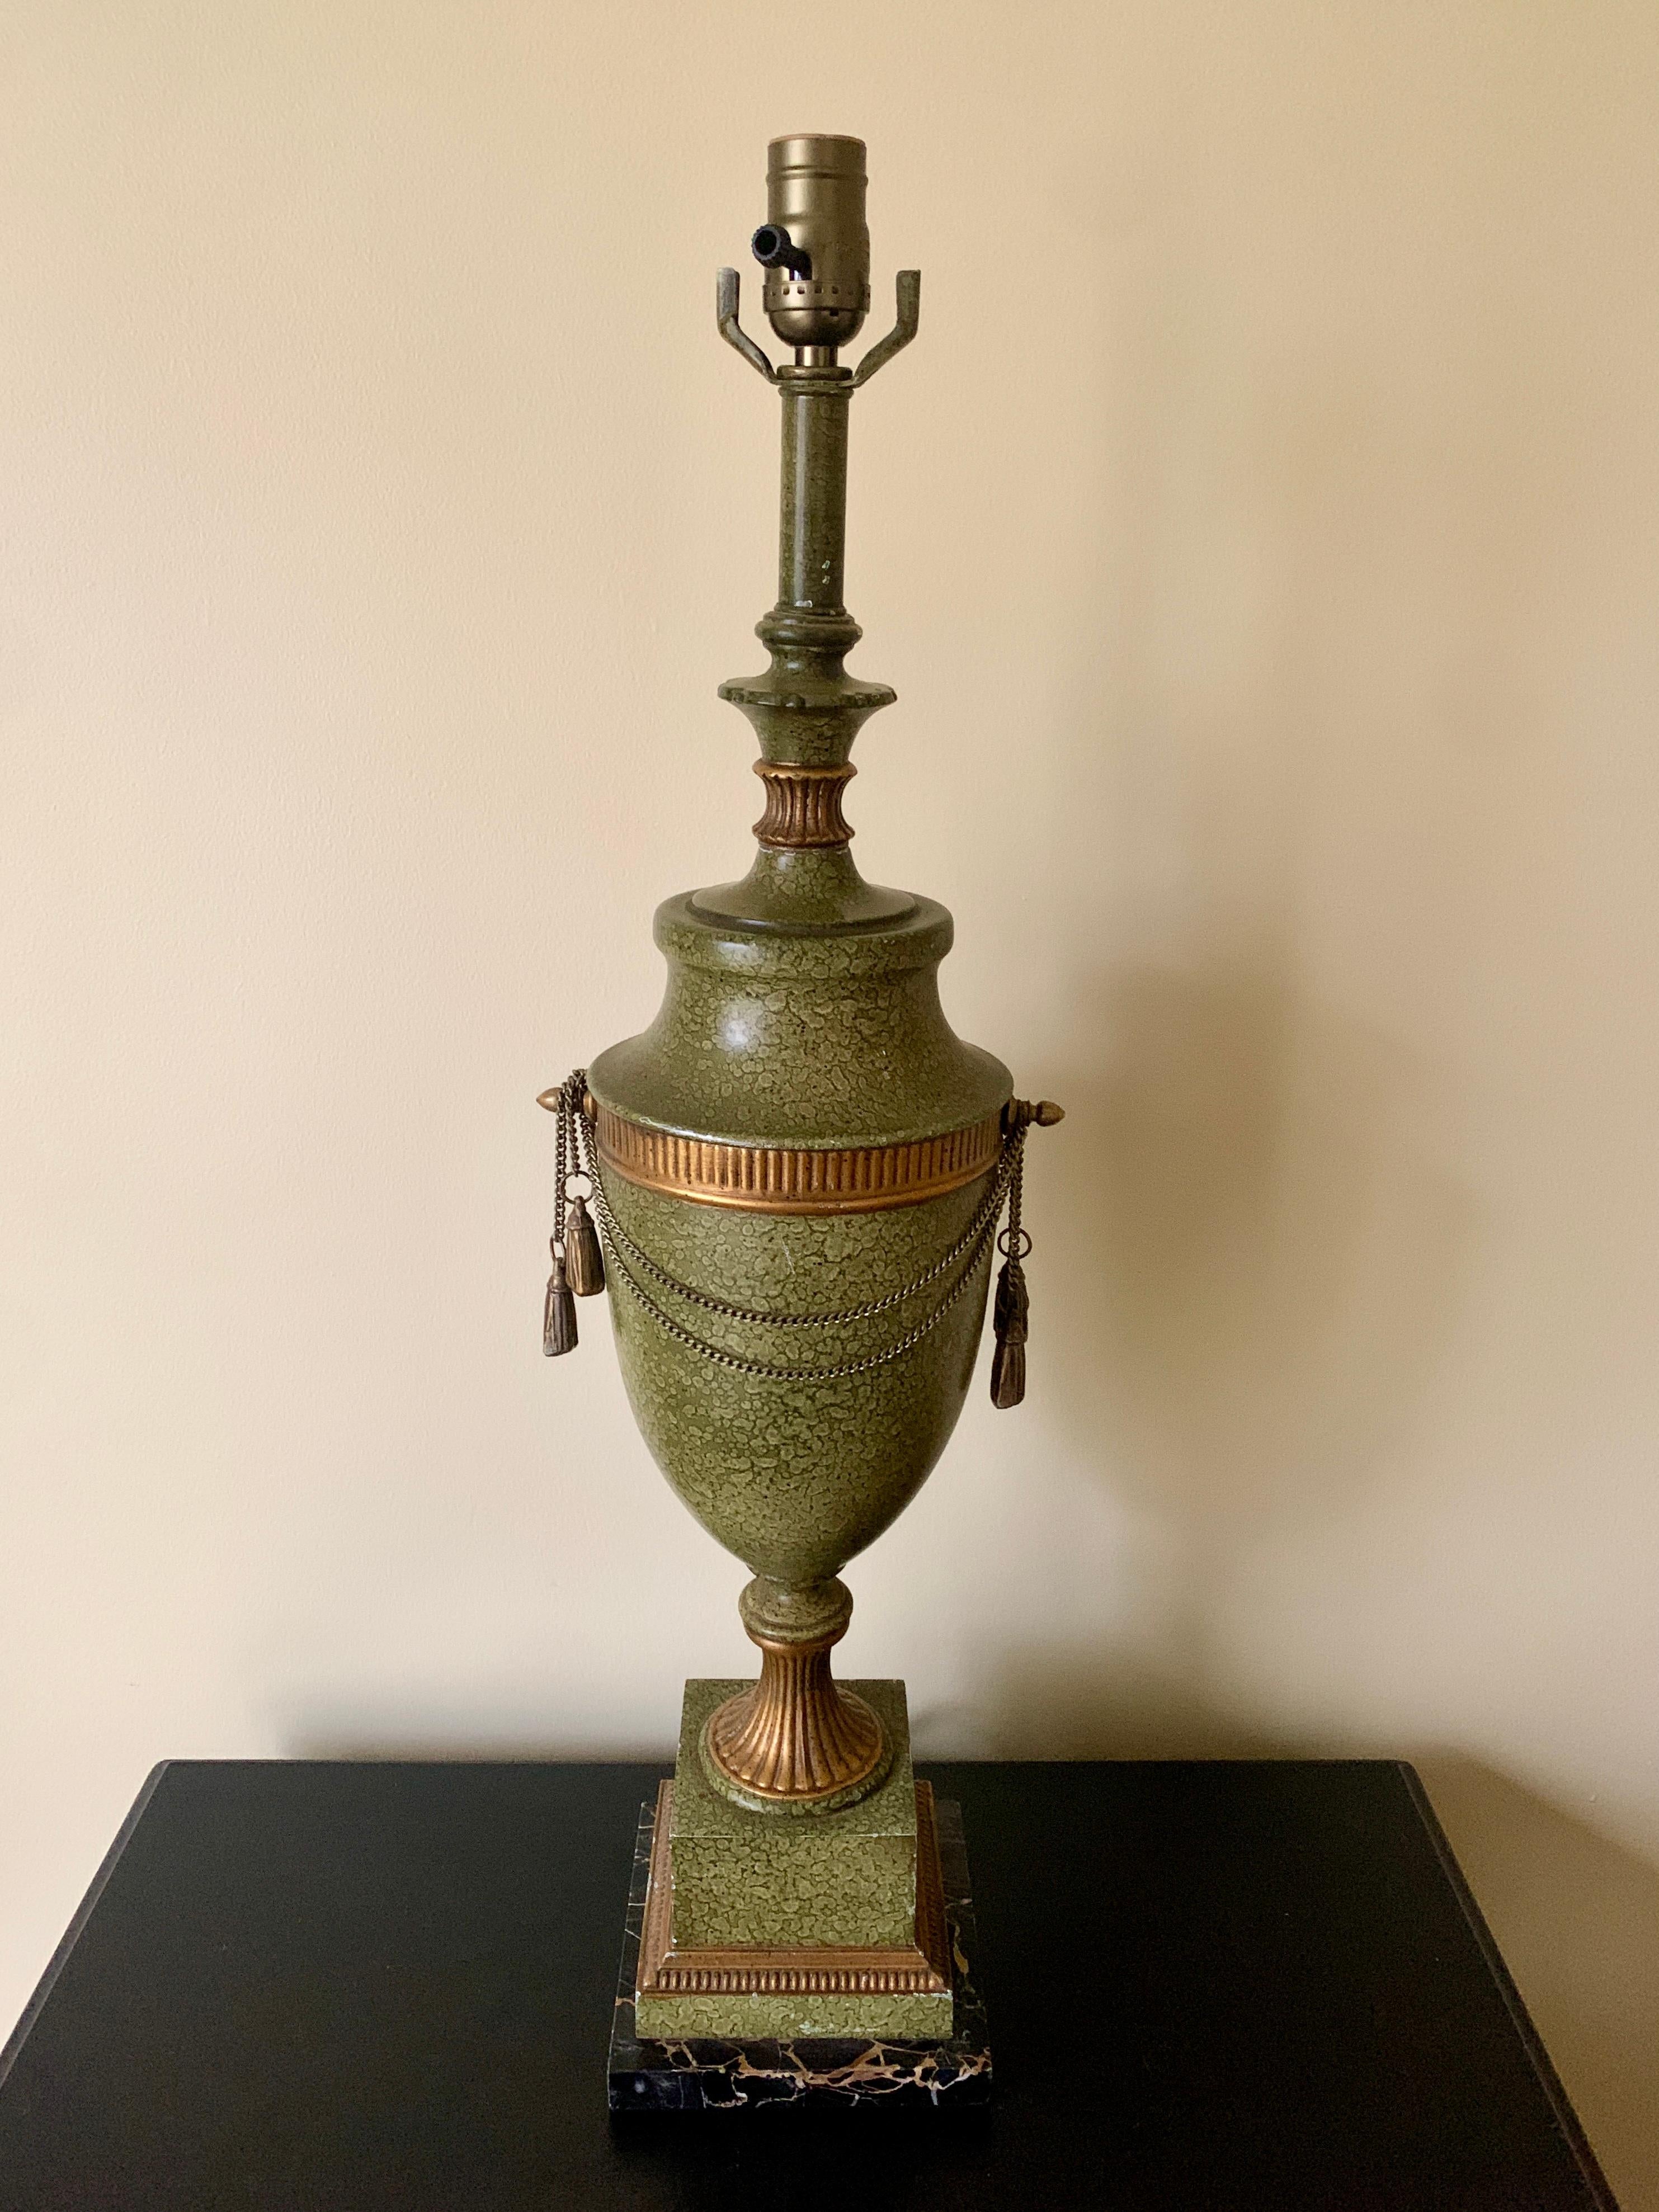 A stunning neoclassical or Hollywood Regency style urn form green tole table lamp

USA, Circa 1960s

Tole painted in an olive green faux marble pattern, with gold gilt details, brass swagger chains with tassels, and black & tan marble